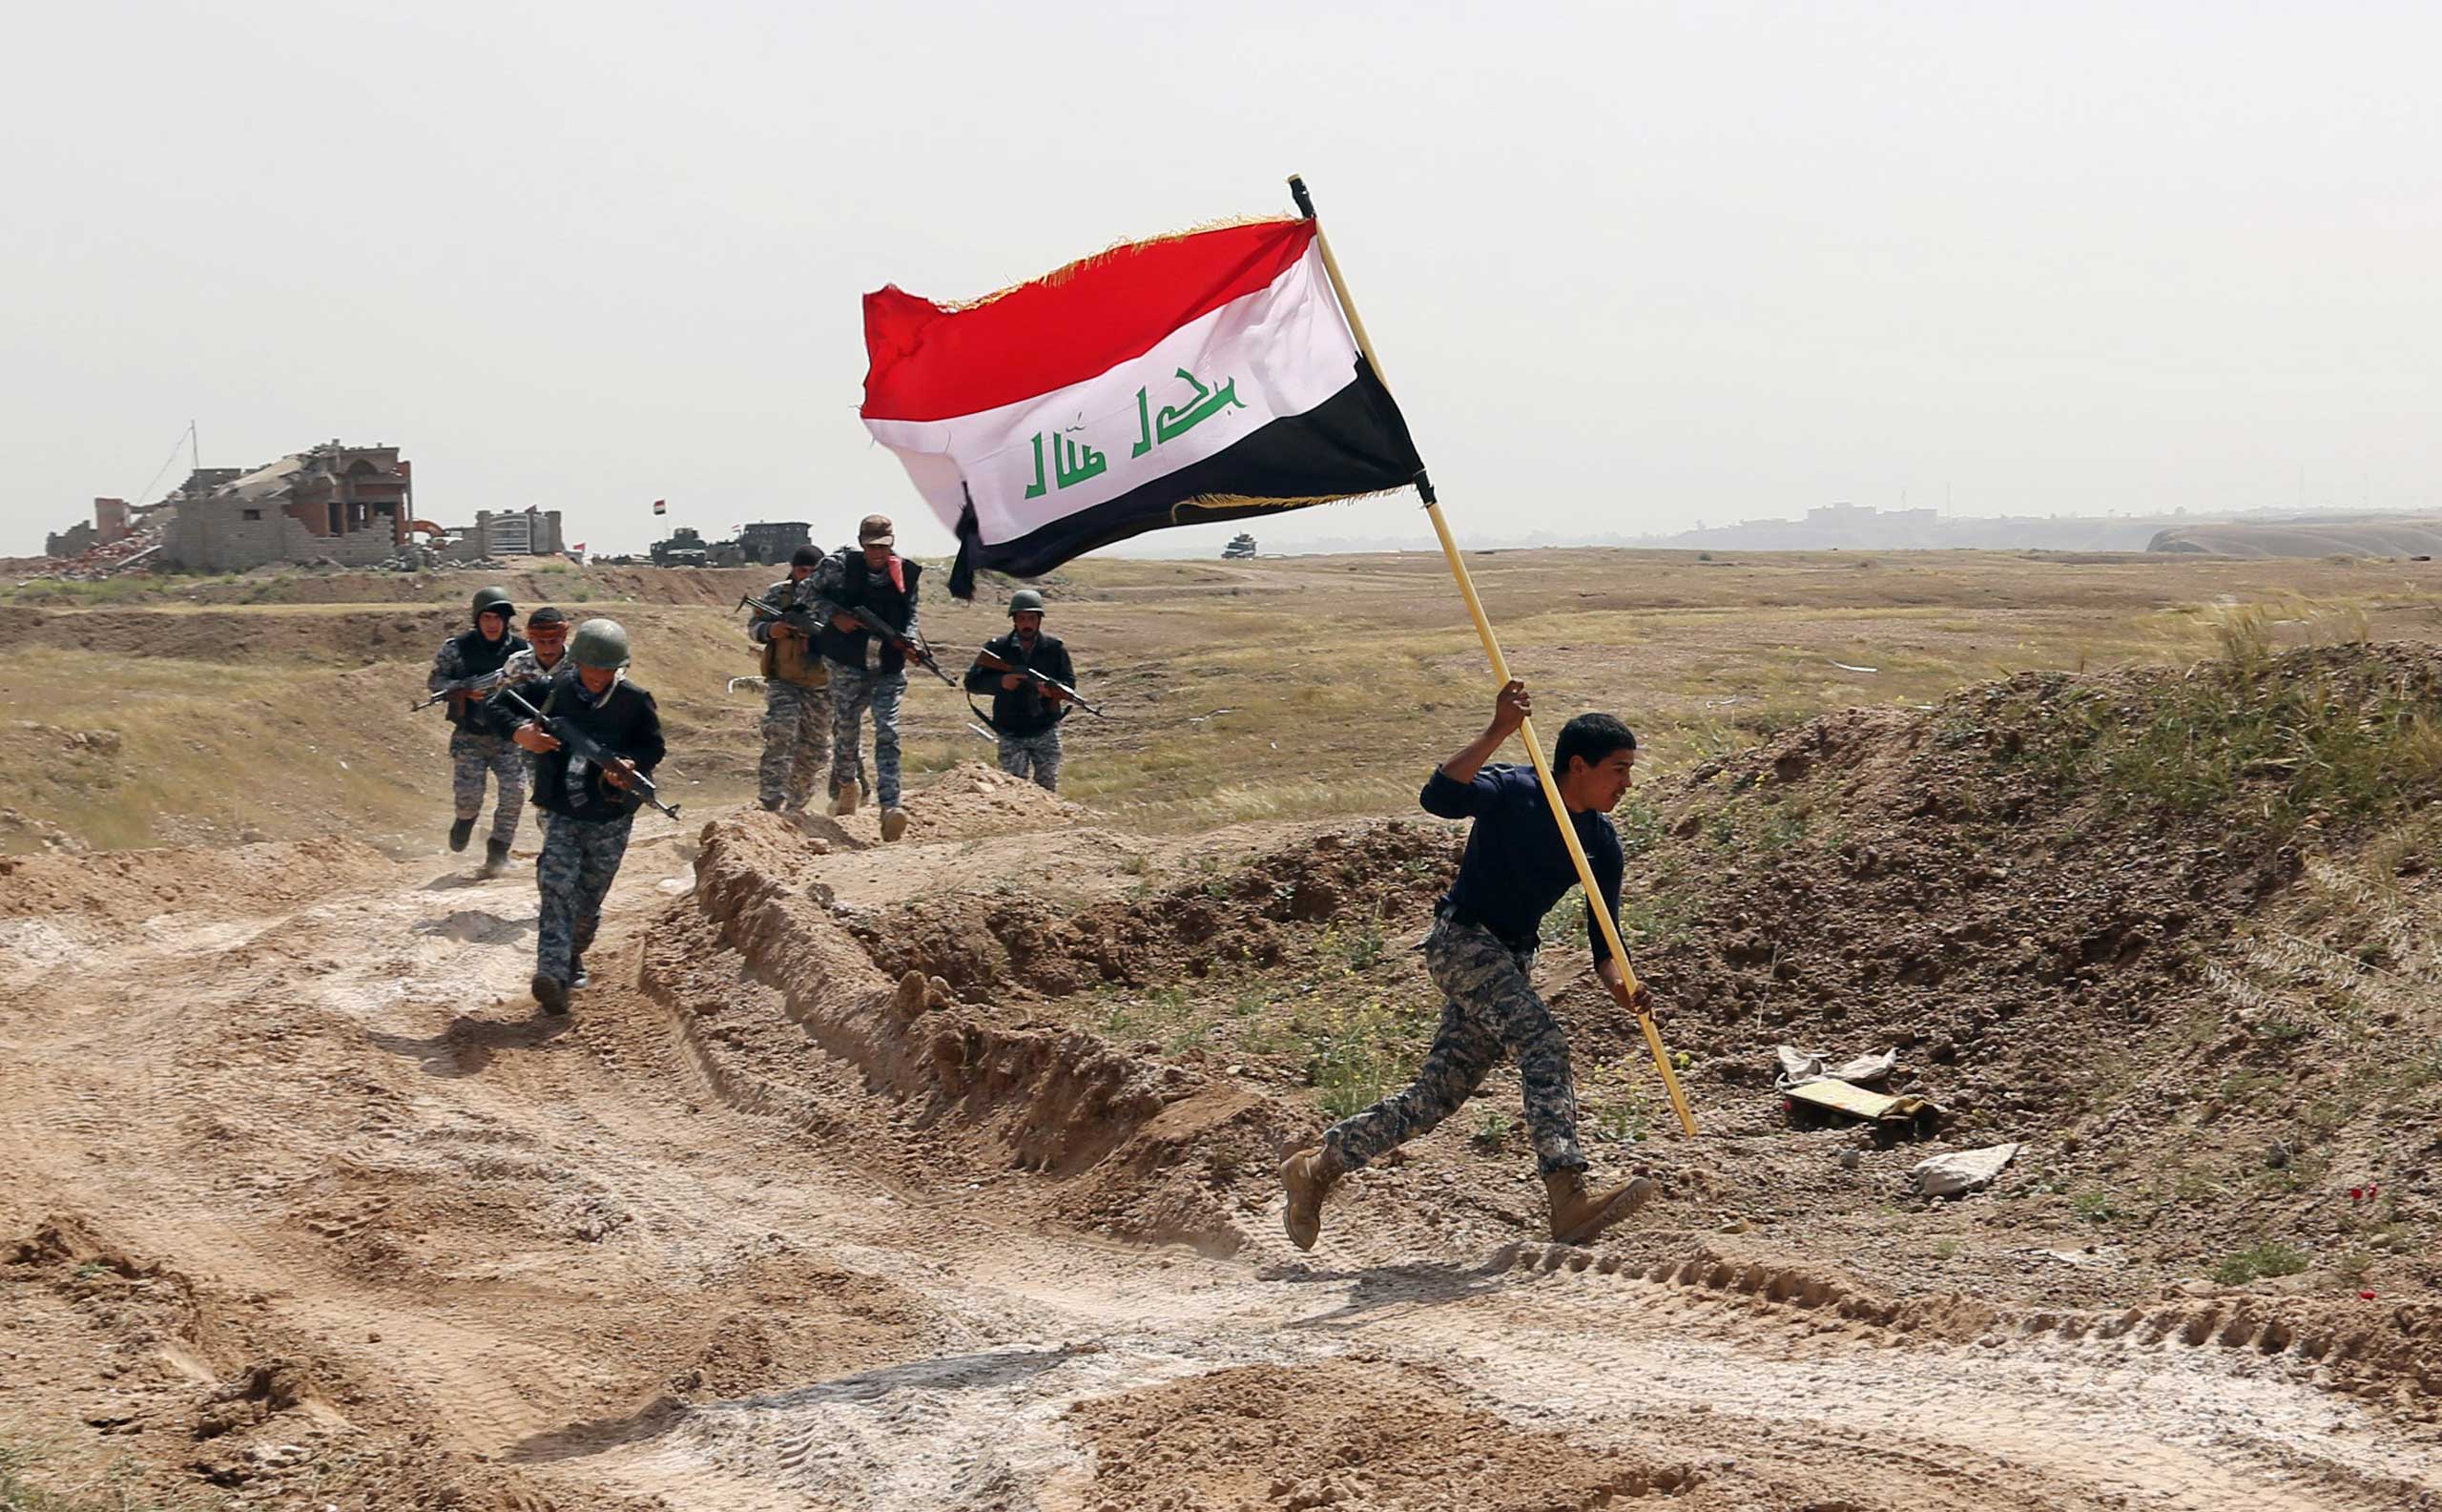 A member of the Iraqi security forces runs to plant the national flag as they surround Tikrit during clashes to regain the city from Islamic State militants, 80 miles north of Baghdad, Iraq, March 30, 2015. (Khalid Mohammed—AP)